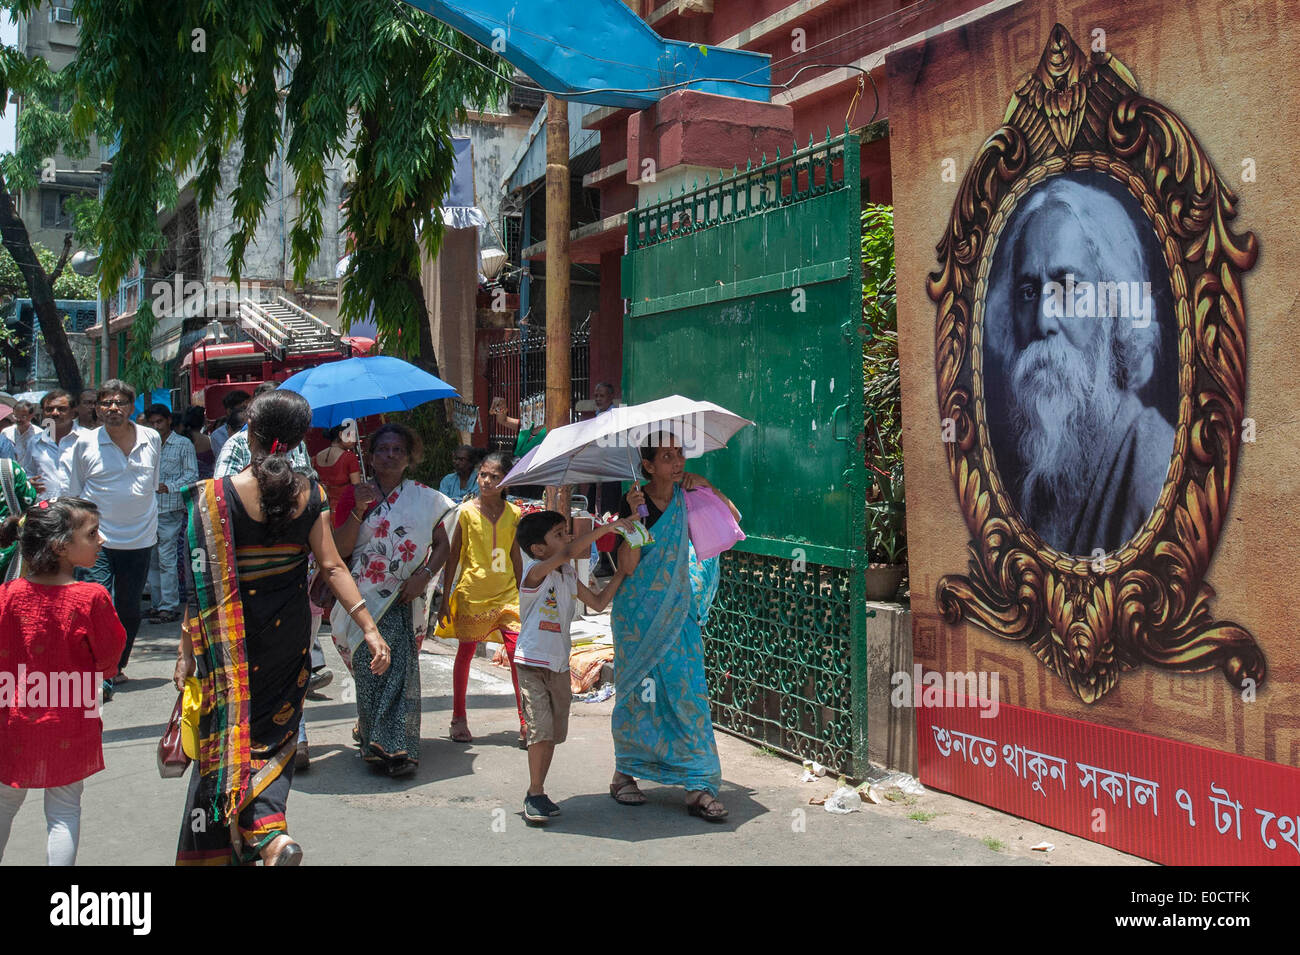 Calcutta. 9th May, 2014. Visitors pass a photo of Rabindranath Tagore as they enter the Nobel laureate's house during a celebration of Tagore's birth anniversary in Calcutta, east of India on May 9, 2014. © Xinhua Photo/Tumpa Mondal/Xinhua/Alamy Live News Stock Photo